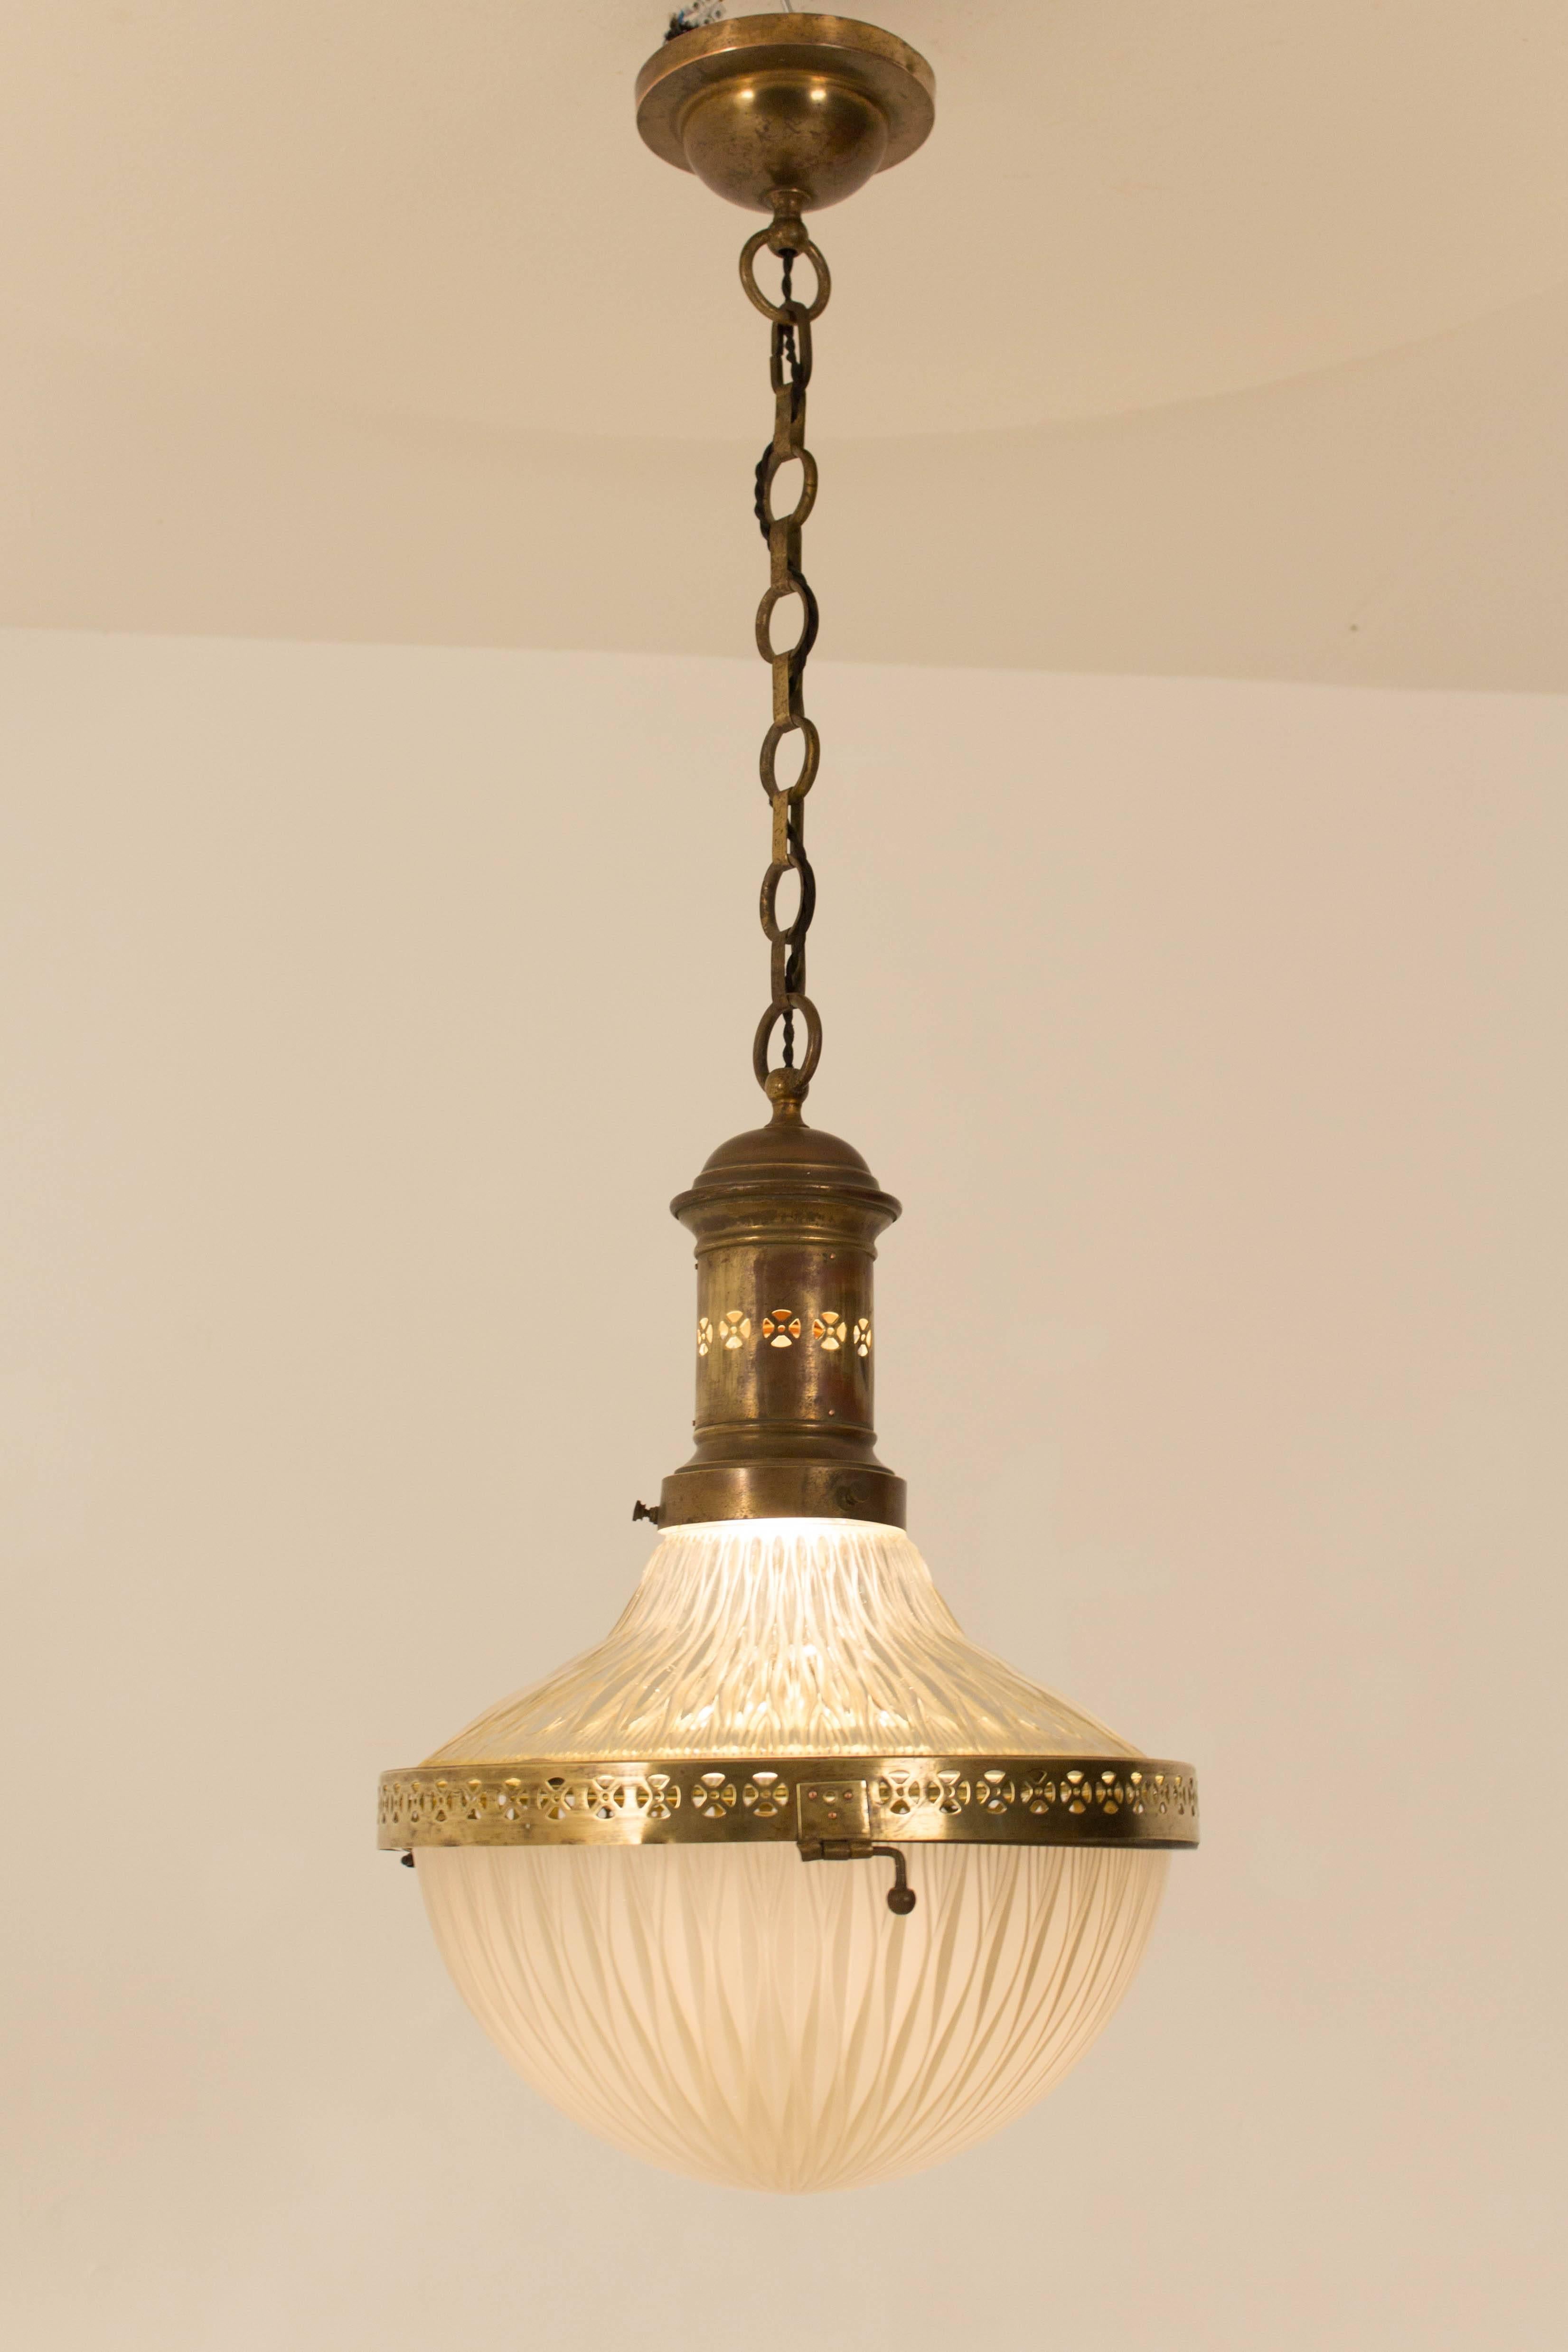 Stunning French Art Deco hall lamp, 1930s.
Brass with original glass shades.
In good condition.